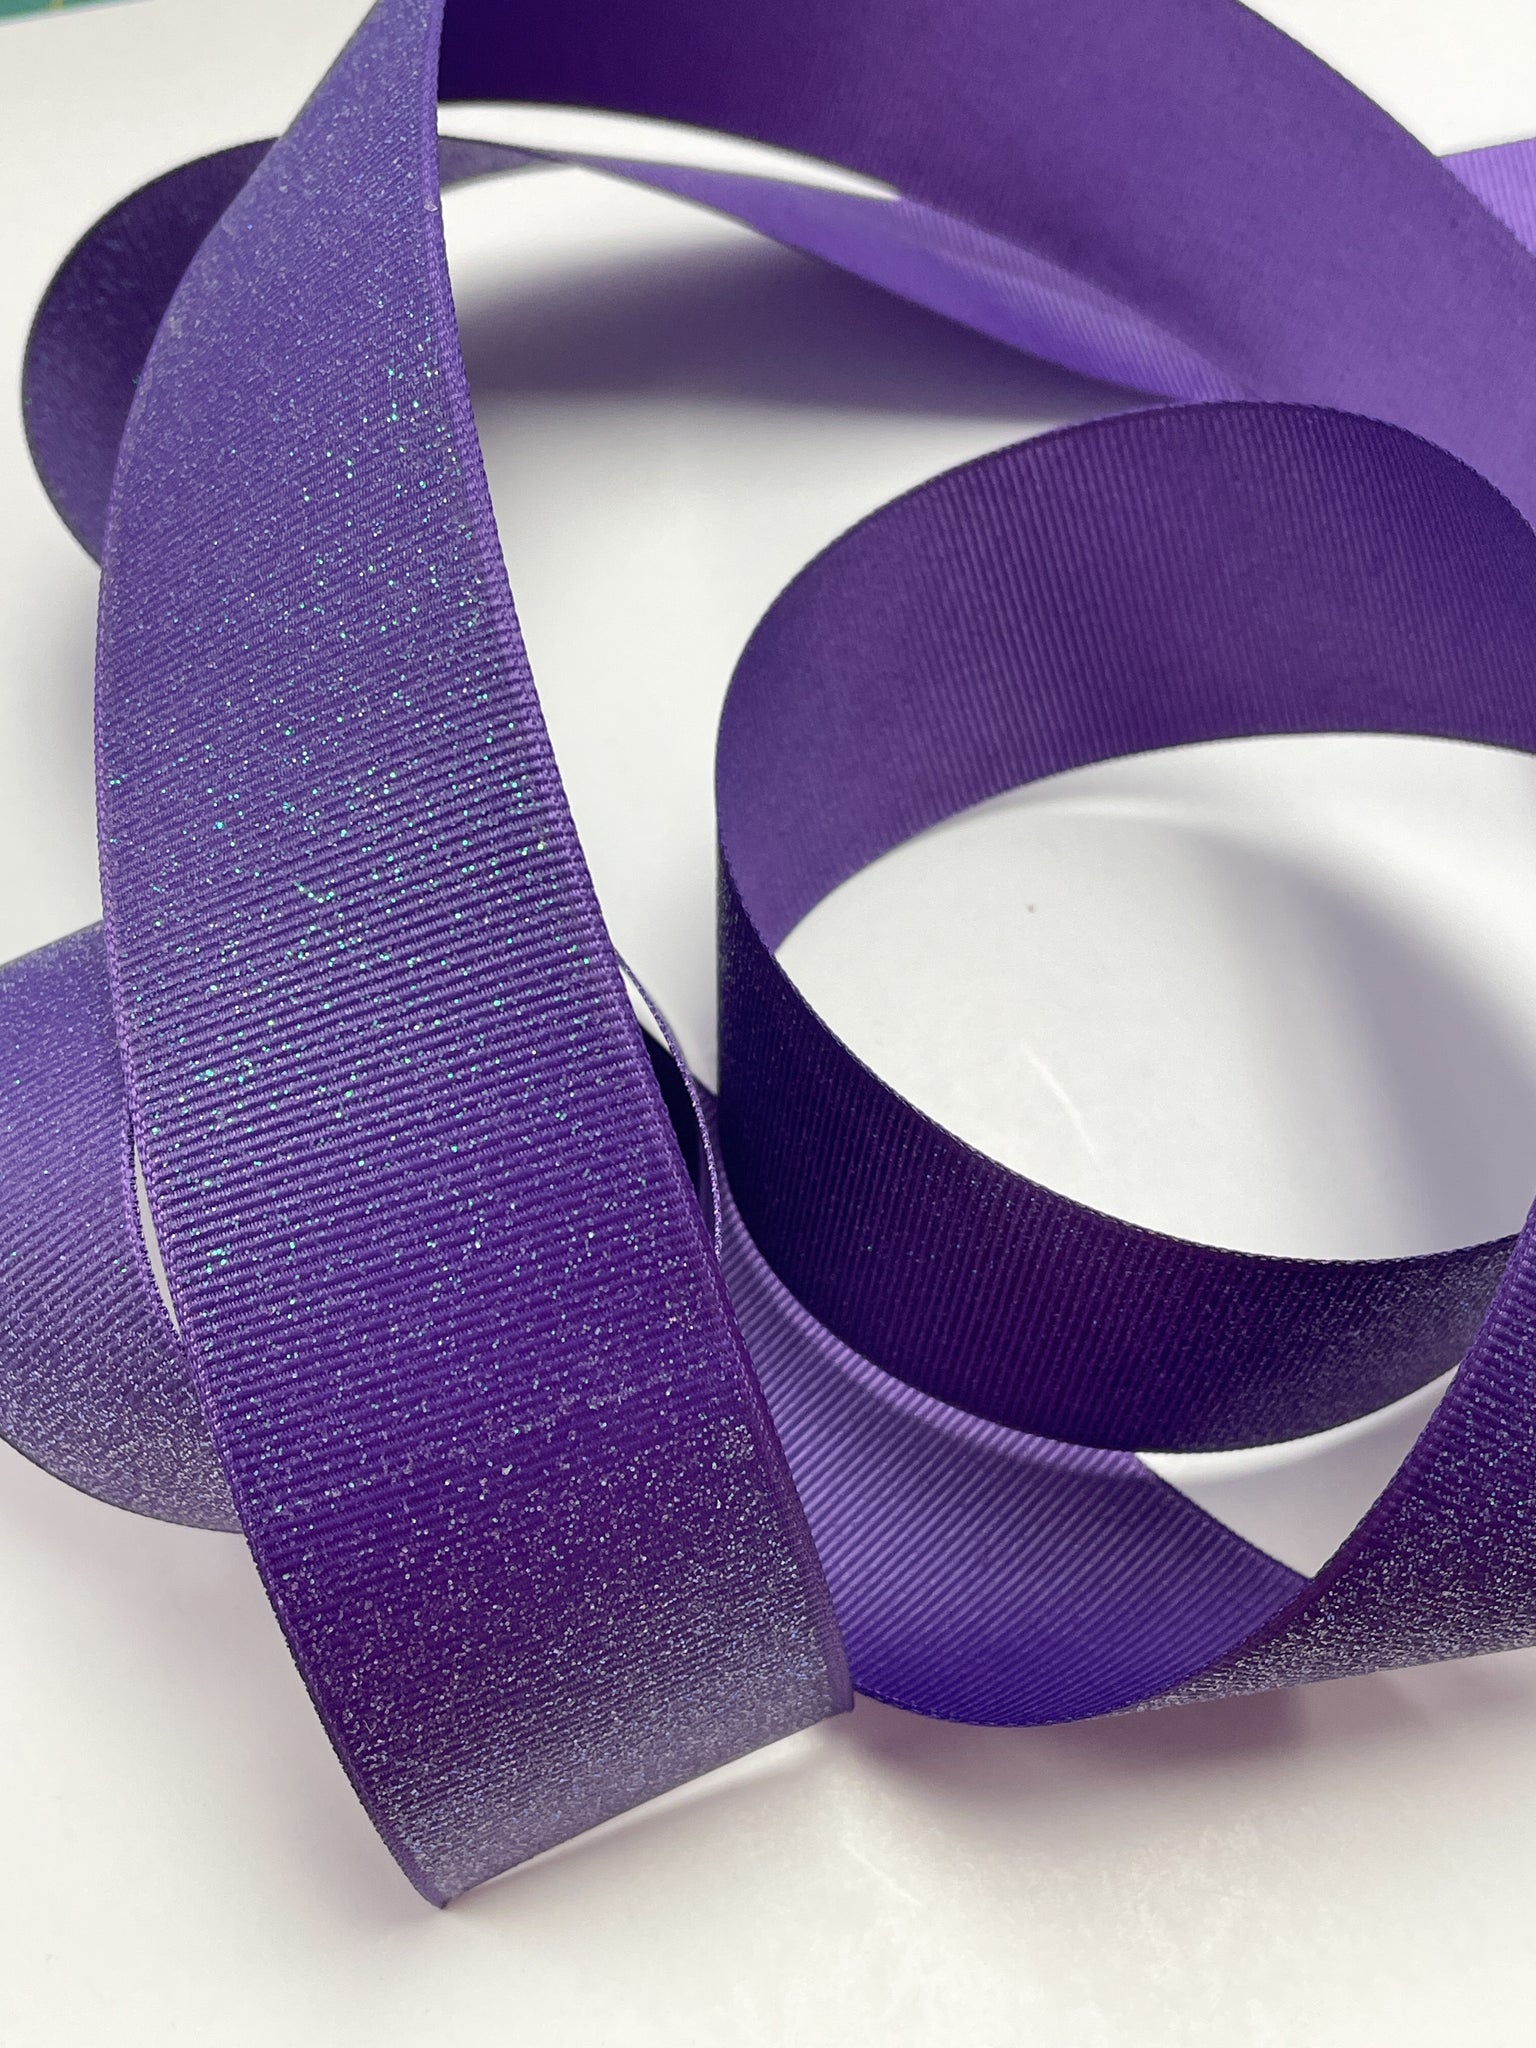 3 YD Polyester Grosgrain Ribbon - Purple with Iridescent Glitter